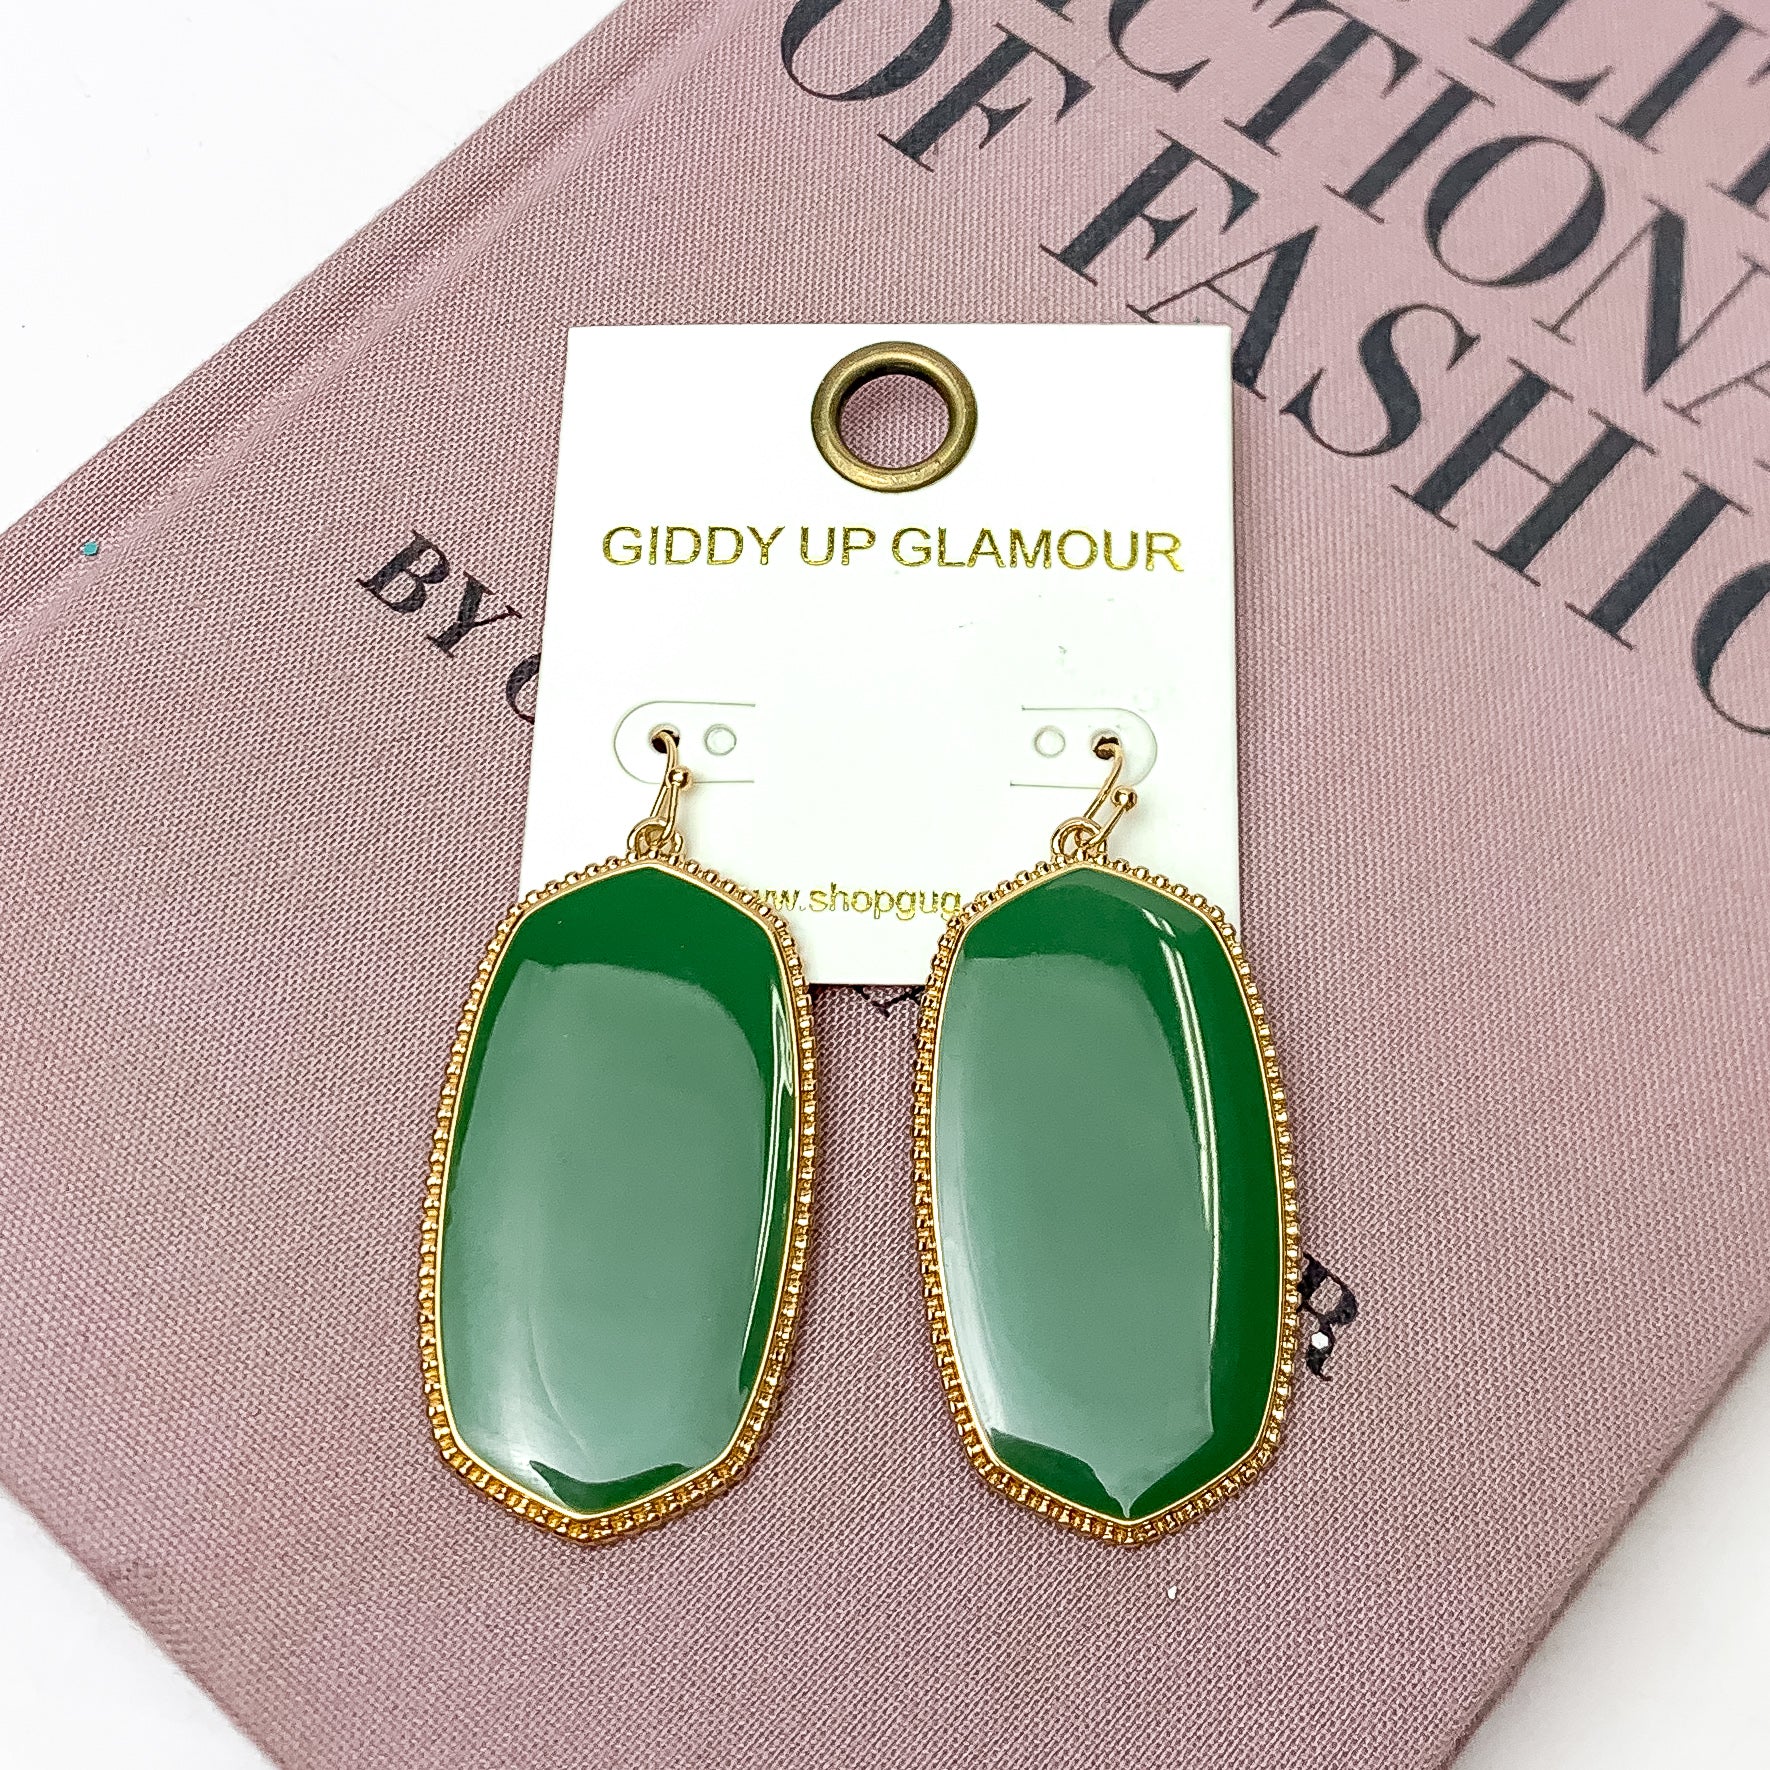 Southern Charm Oval Earrings in Olive Green. These earrings are laying on a pink book with a white background behind the book.